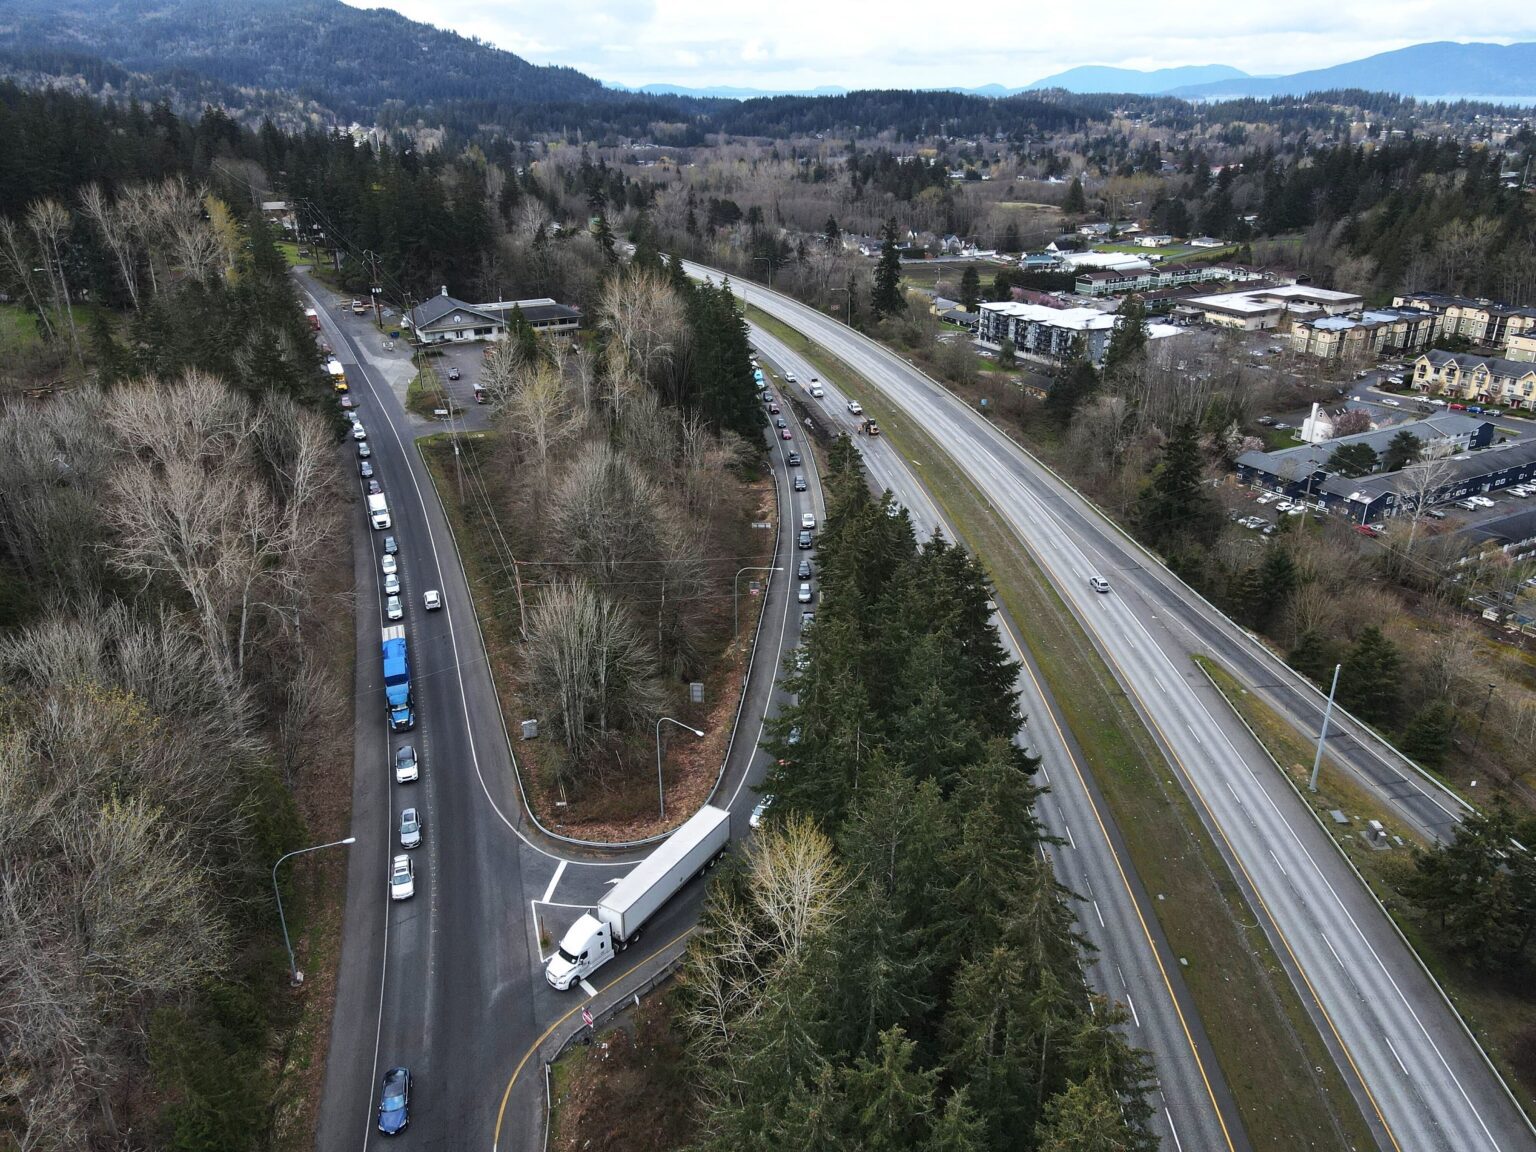 A semitruck overturned near the South Samish Way/WWU overpass